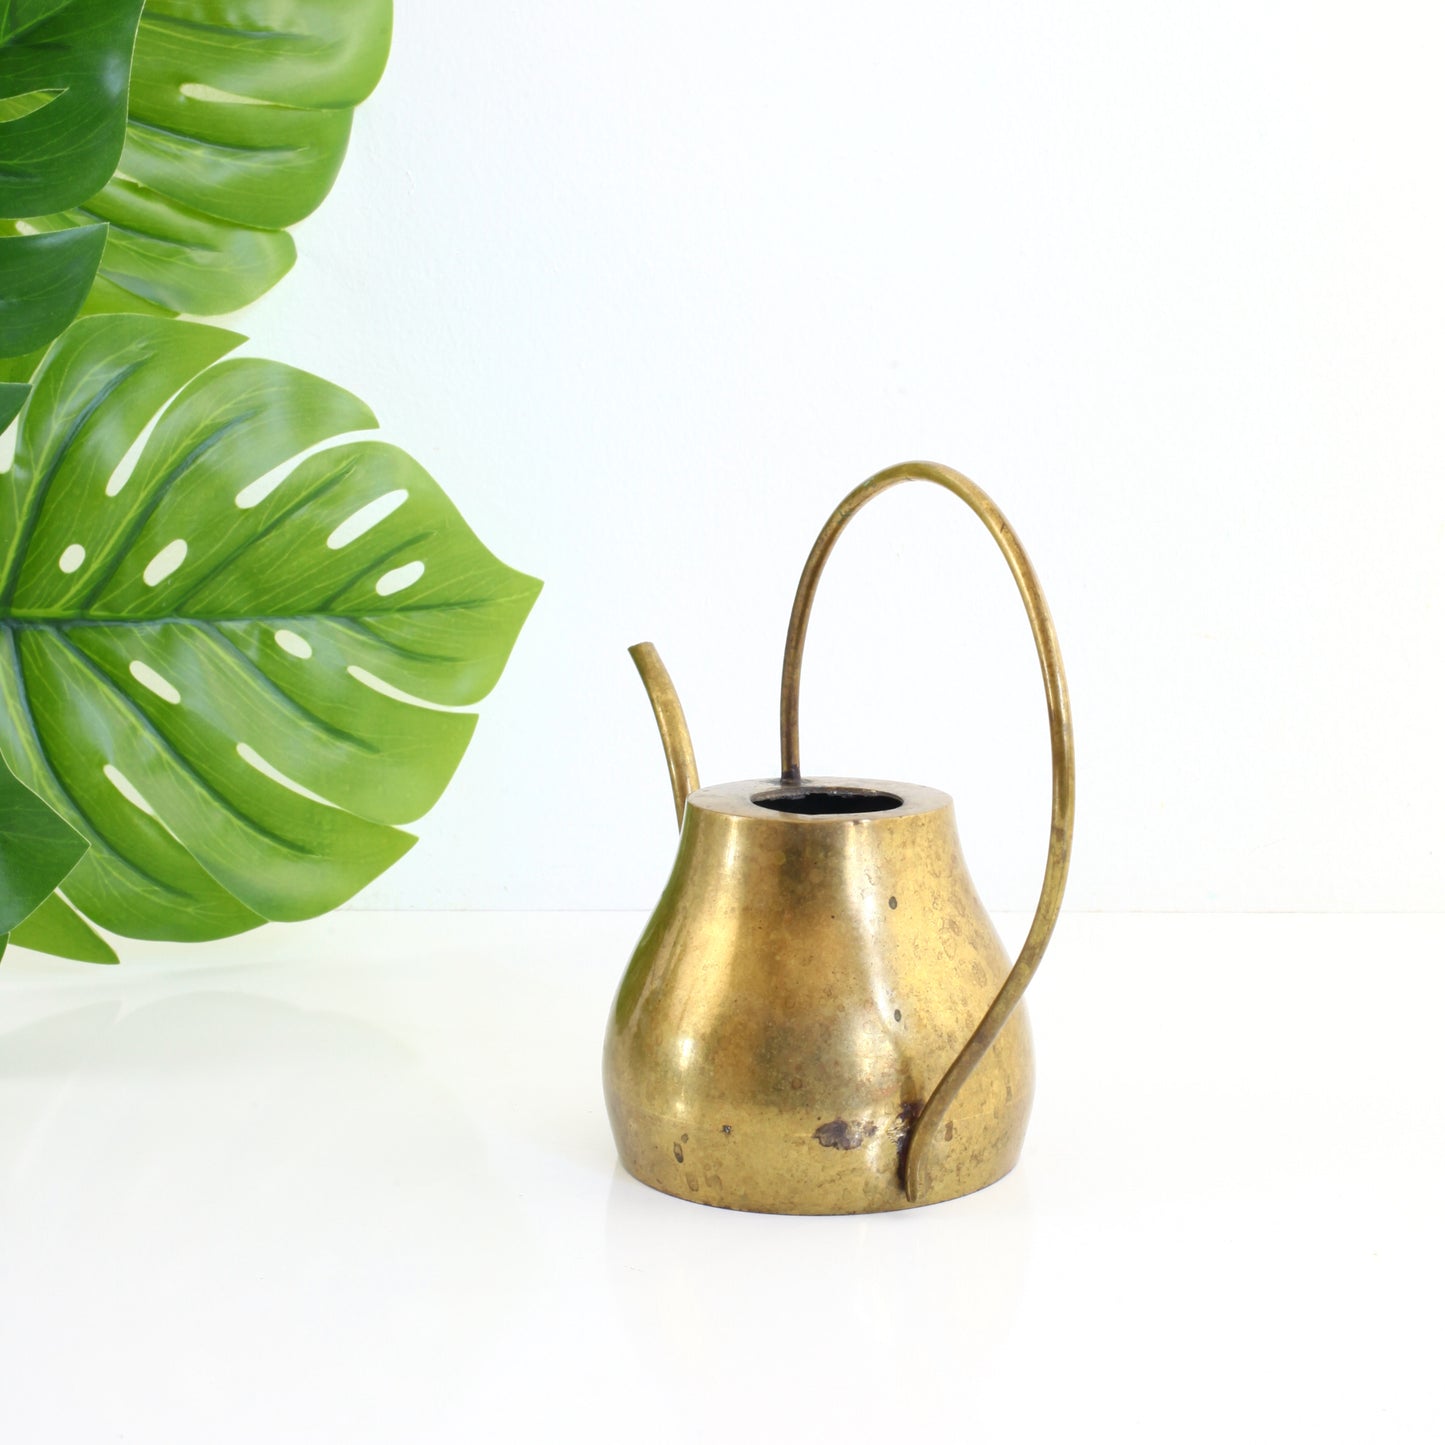 SOLD - Vintage Brass Watering Can